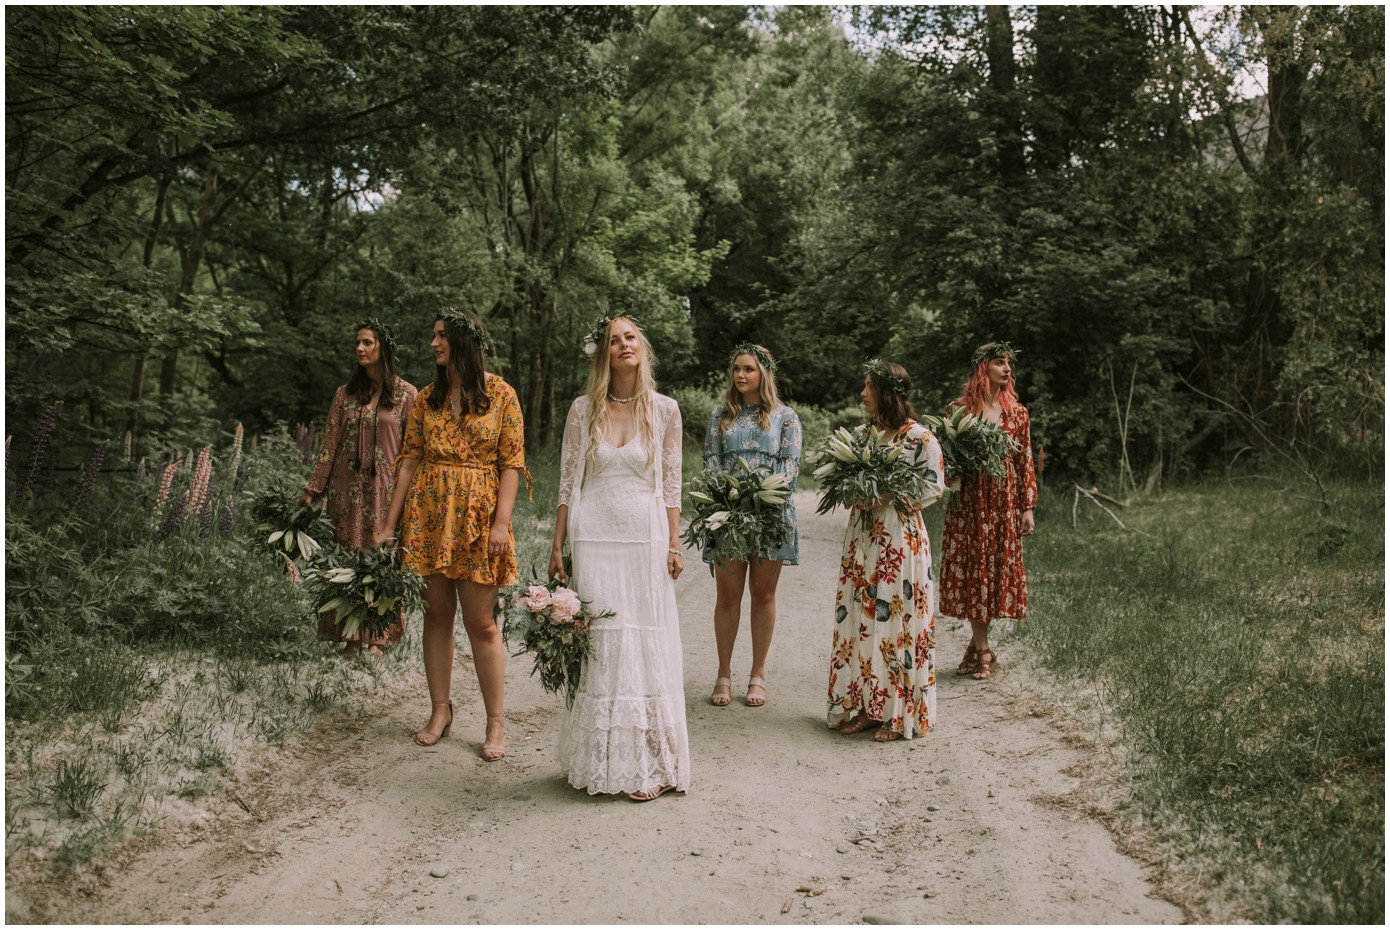 Charlotte Kiri Photography - Wedding Photography of a bride wearing a pretty bohemian lace dress standing on a secluded dirt road and surrounded by her lovely bridesmaids who wear colourful floral dresses with wreaths and rustic bouquets, in Arrowtown, New Zealand.